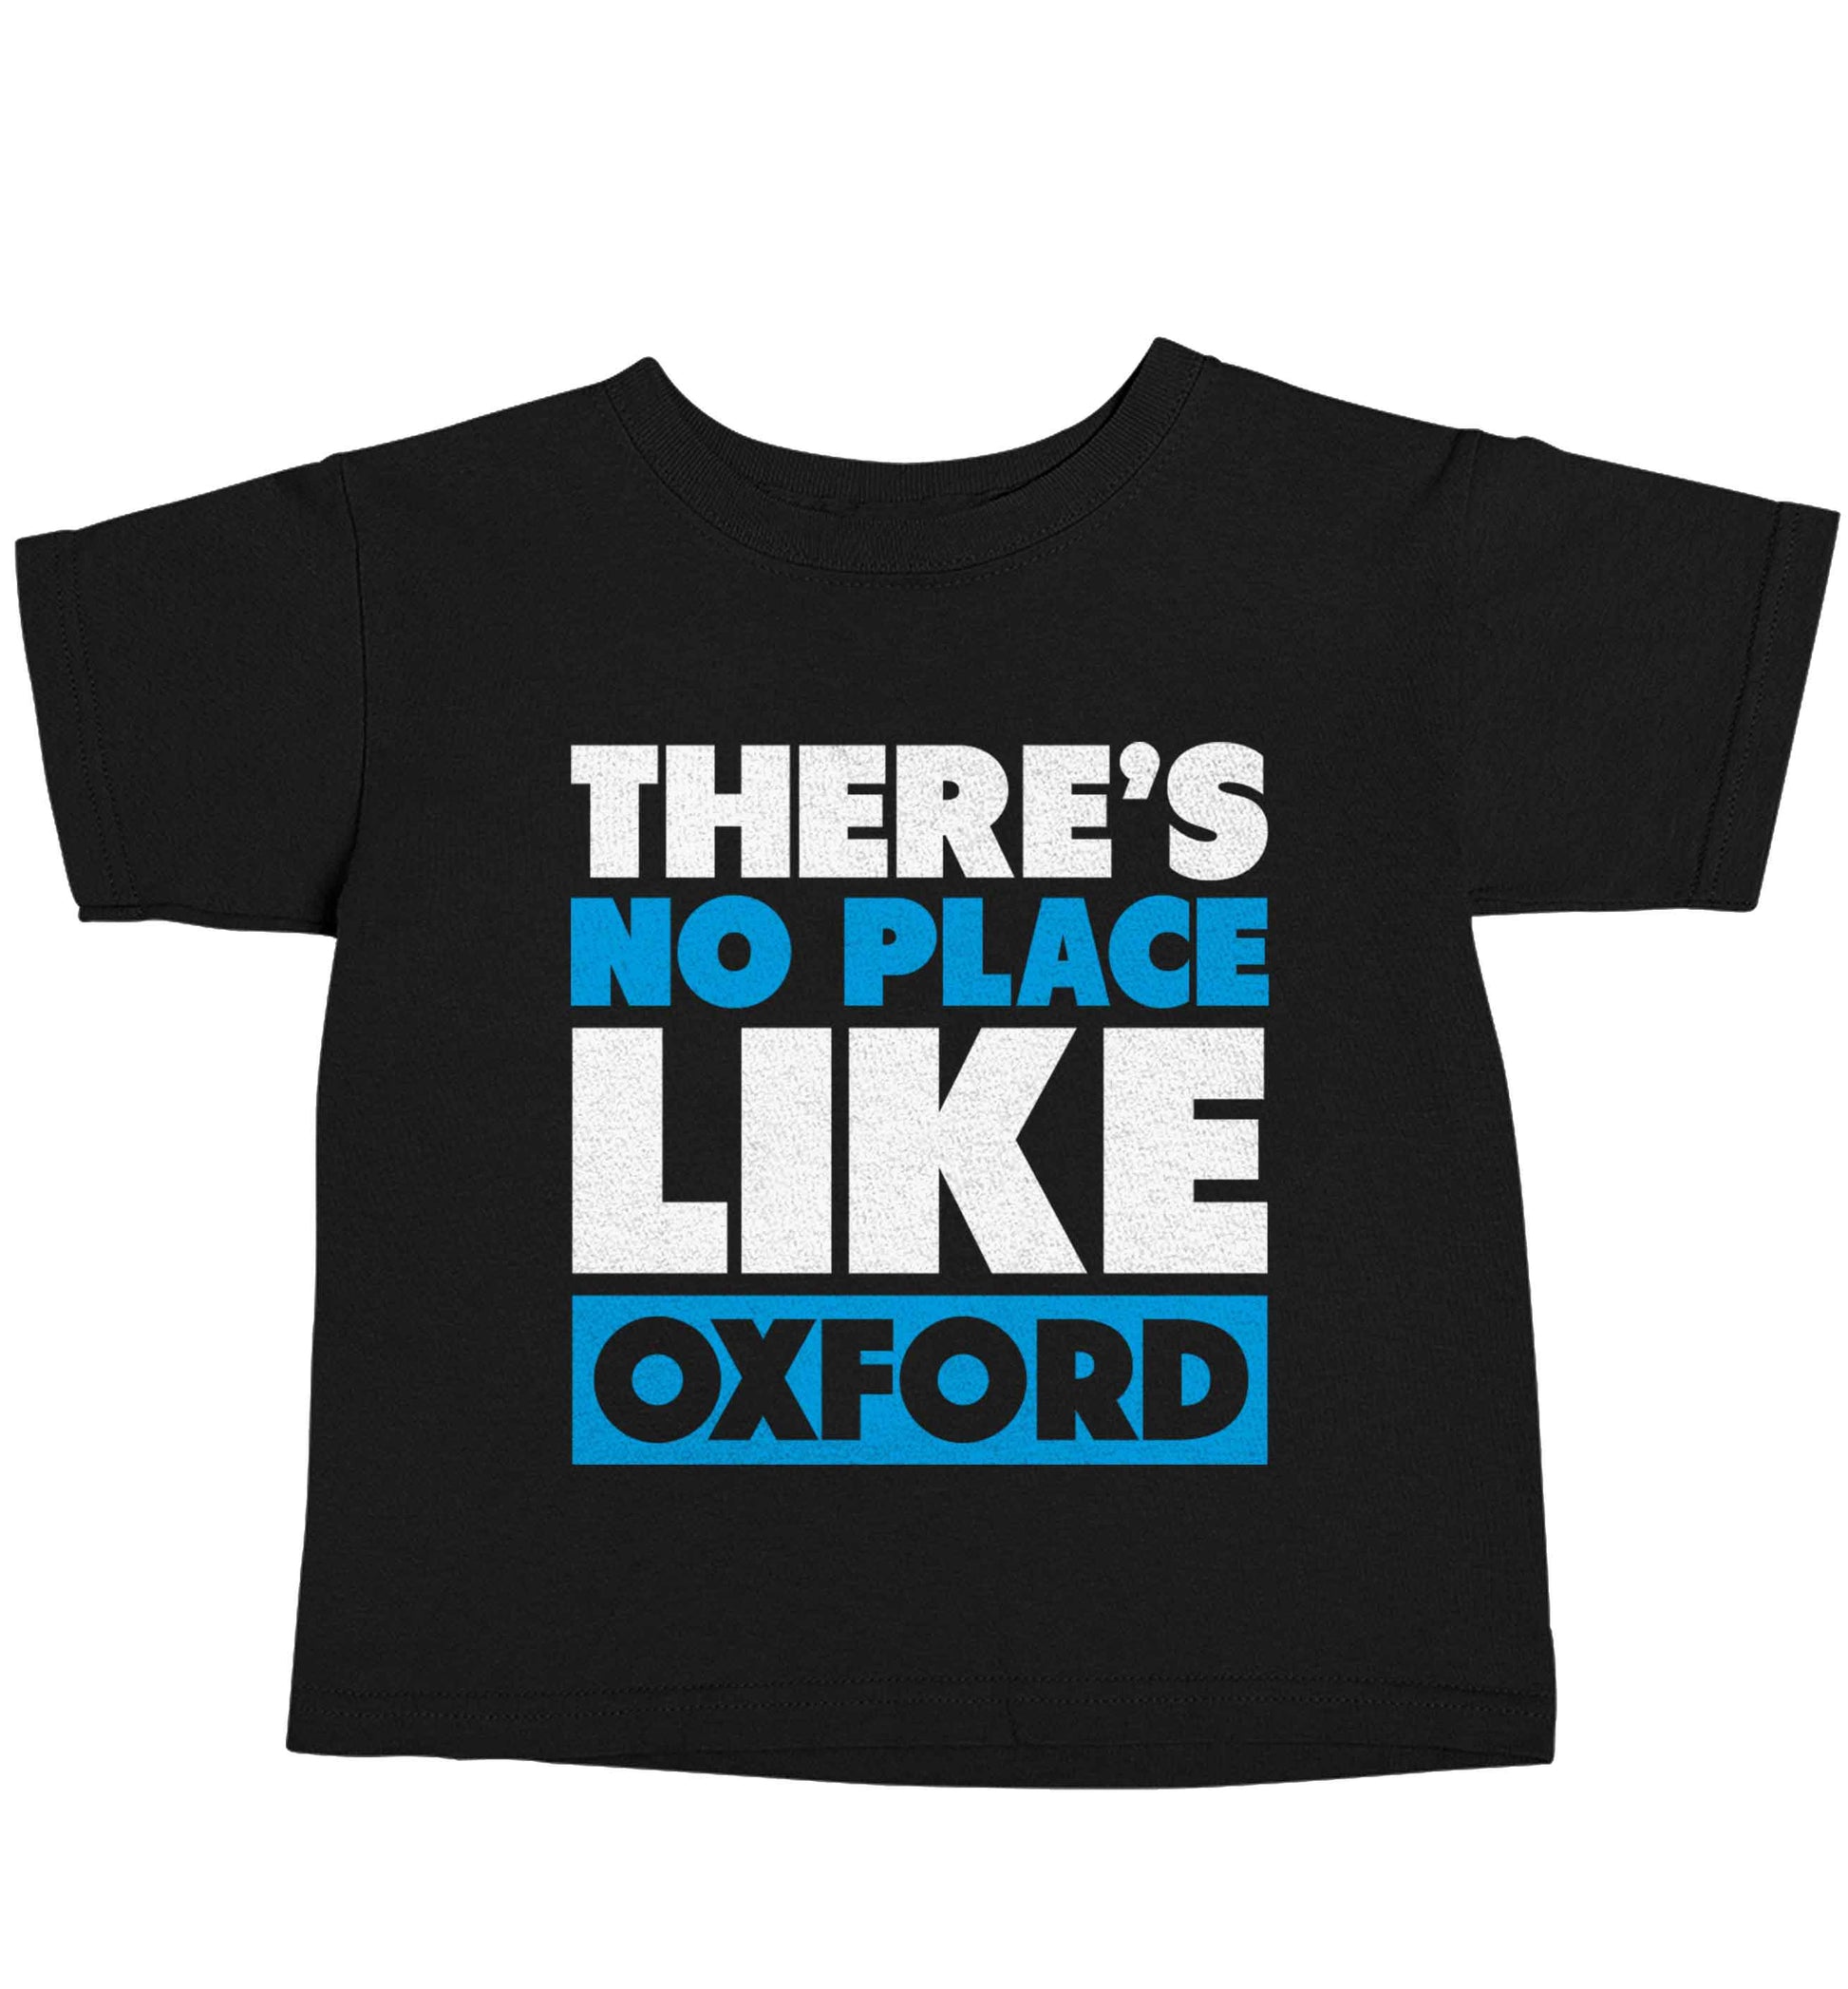 There's no place like Oxford Black baby toddler Tshirt 2 years